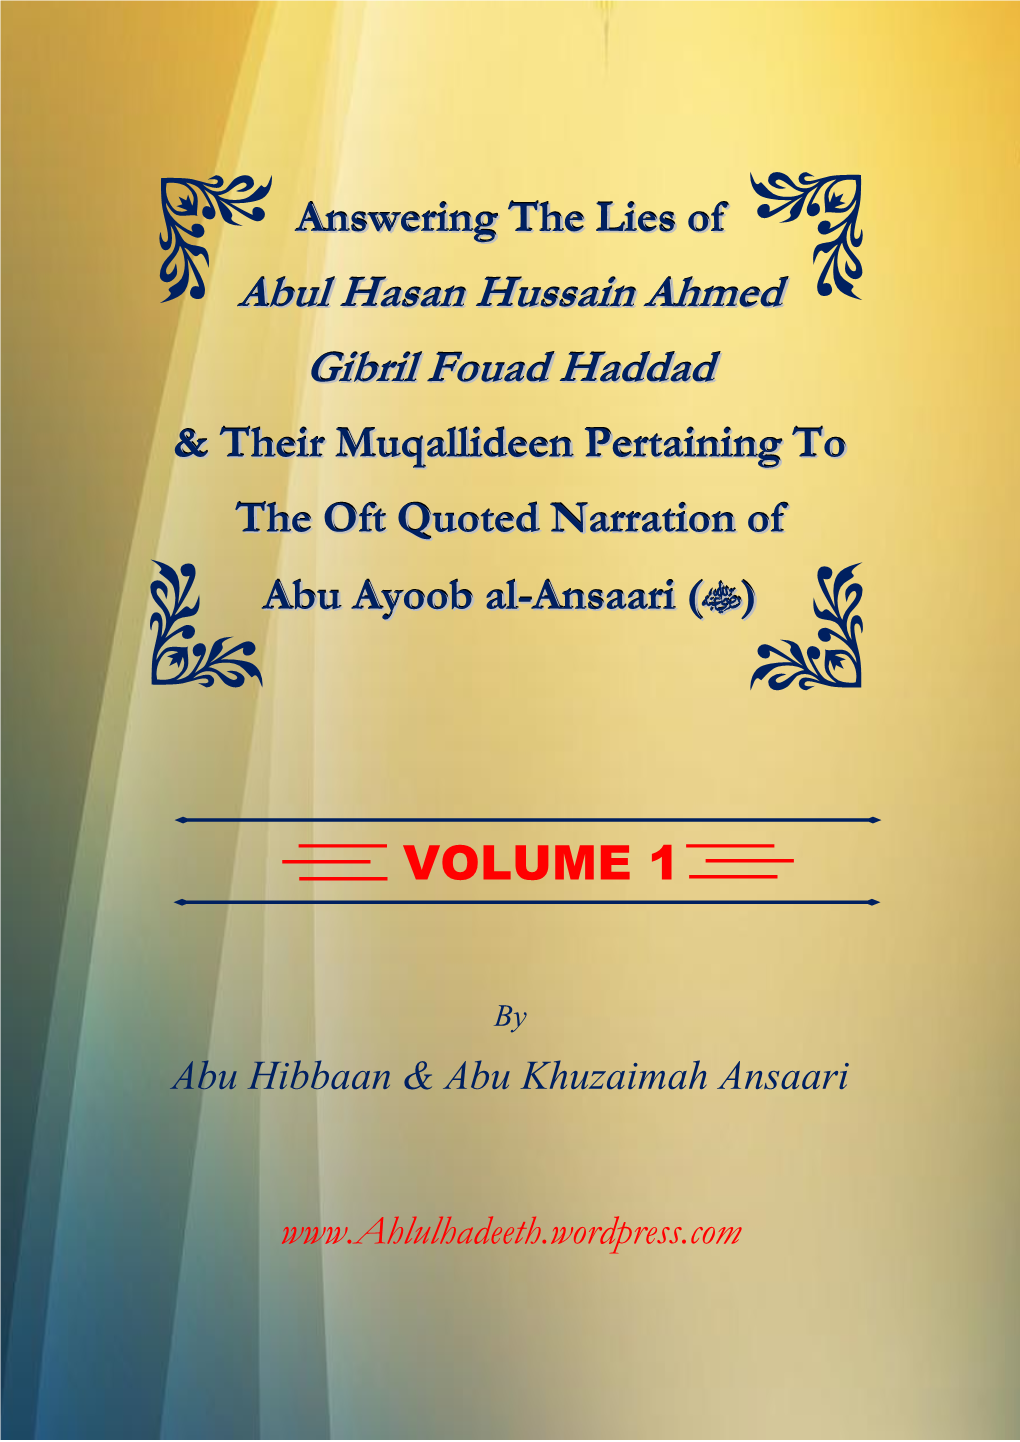 Gibril Fouad Haddad & Their Muqallideen Pertaining to the Oft Quoted Narration of Abu Ayoob Al-Ansaari () Volume 1